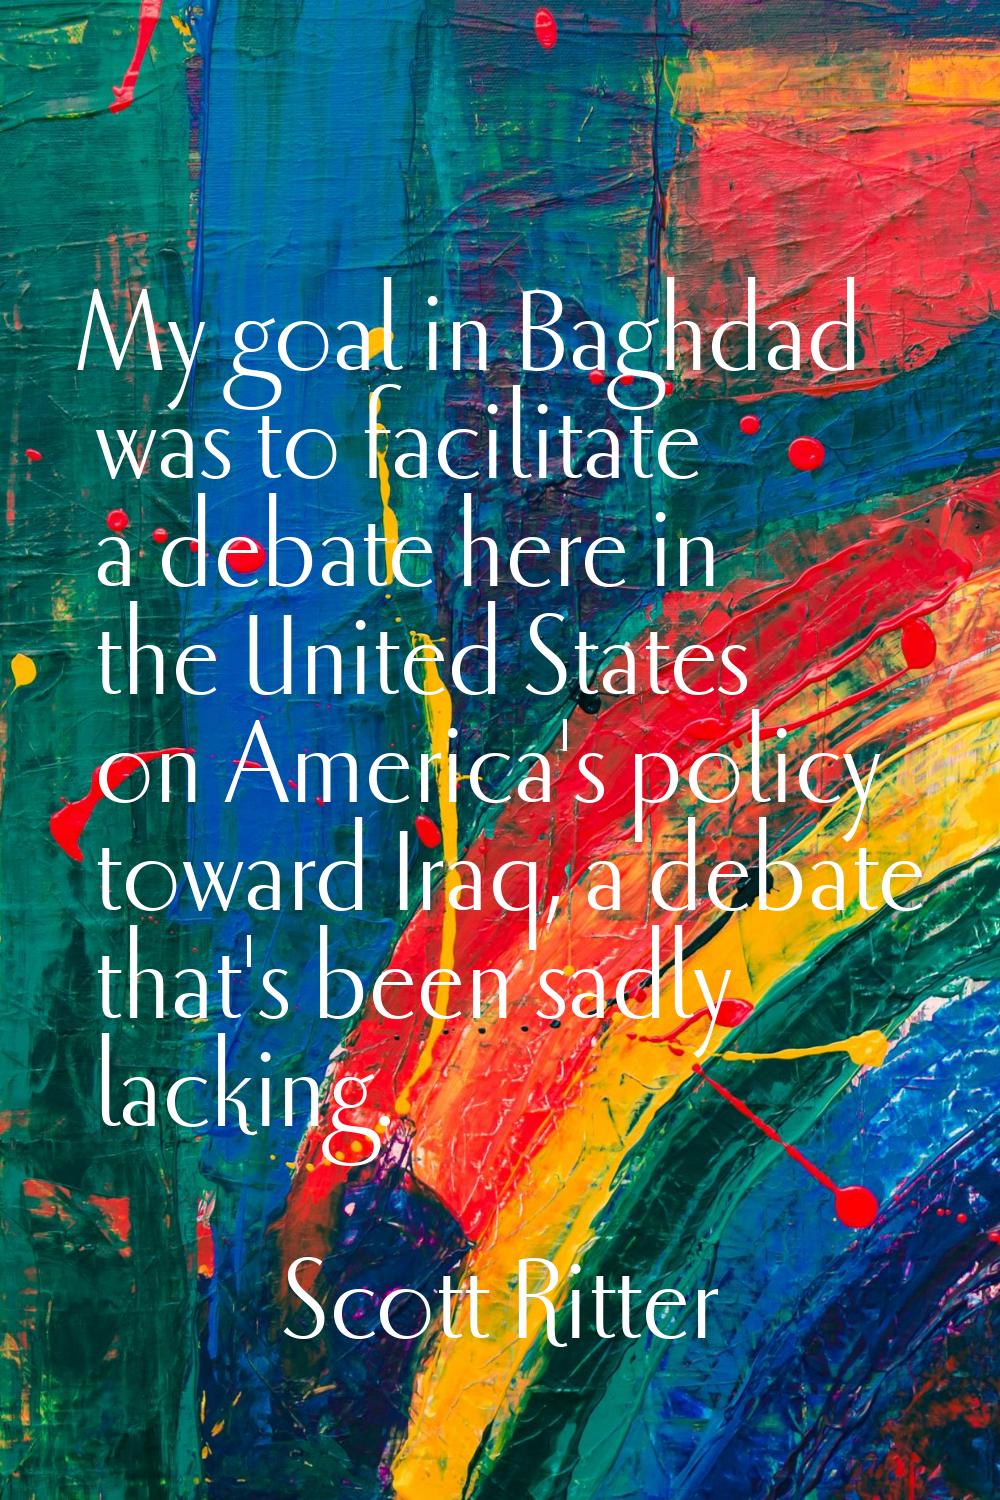 My goal in Baghdad was to facilitate a debate here in the United States on America's policy toward 